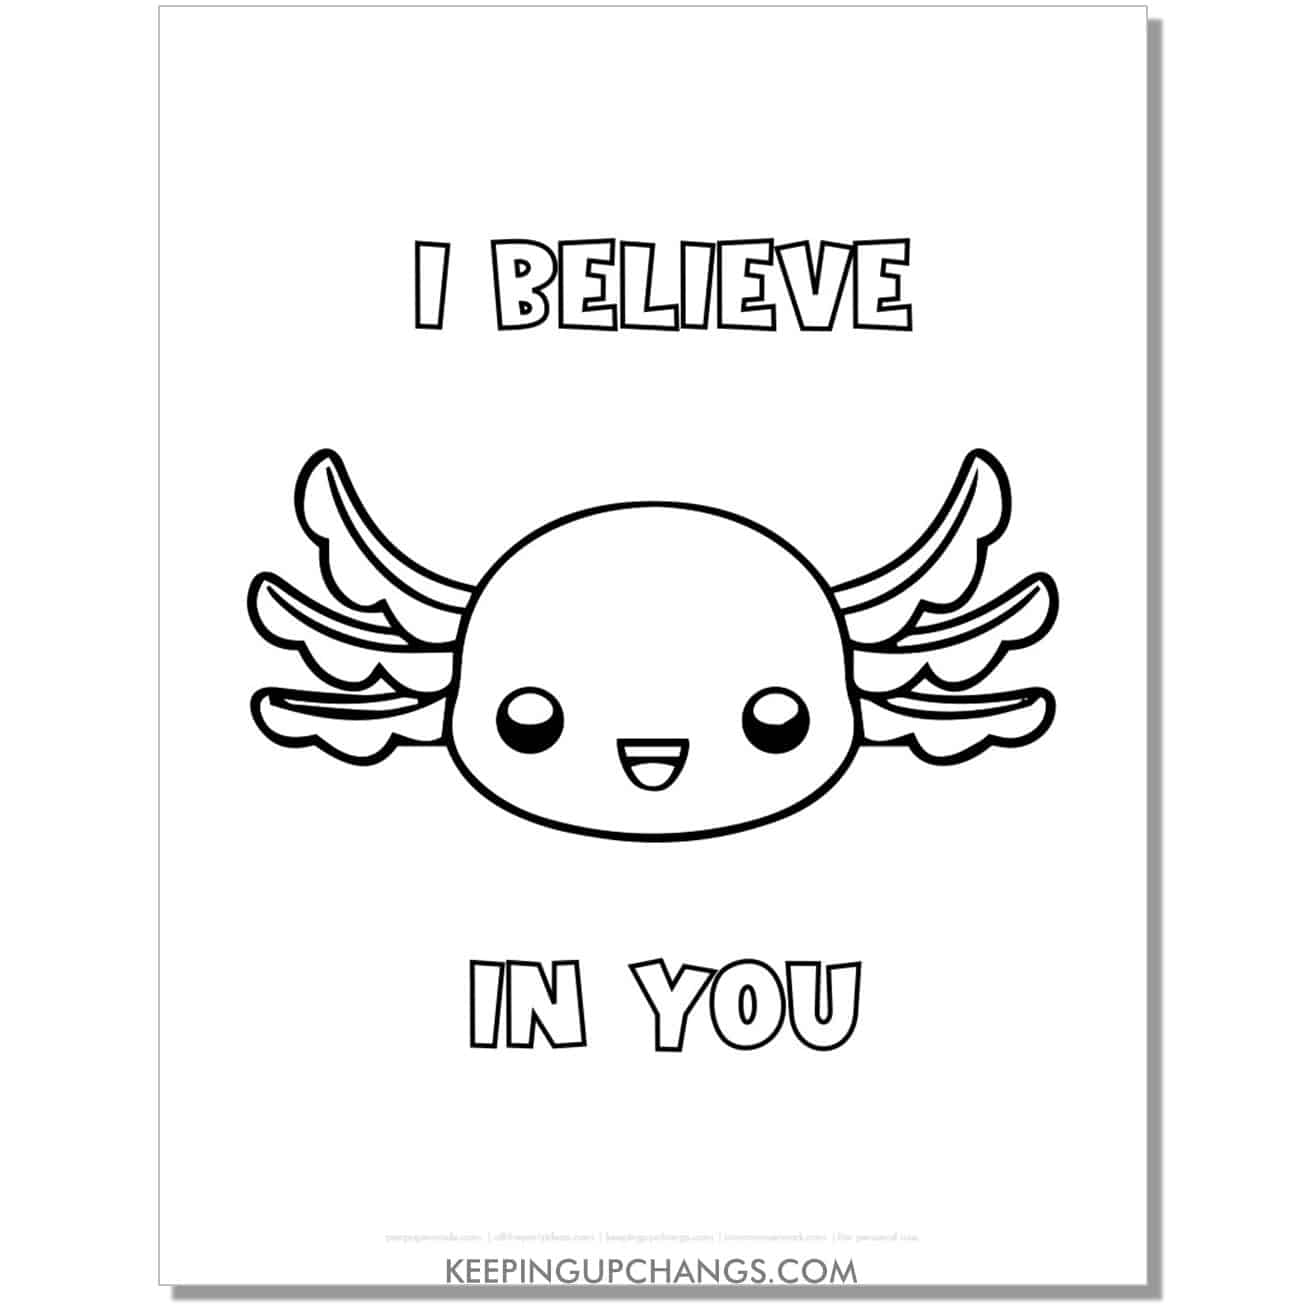 free axolotl head coloring page with i believe in you.